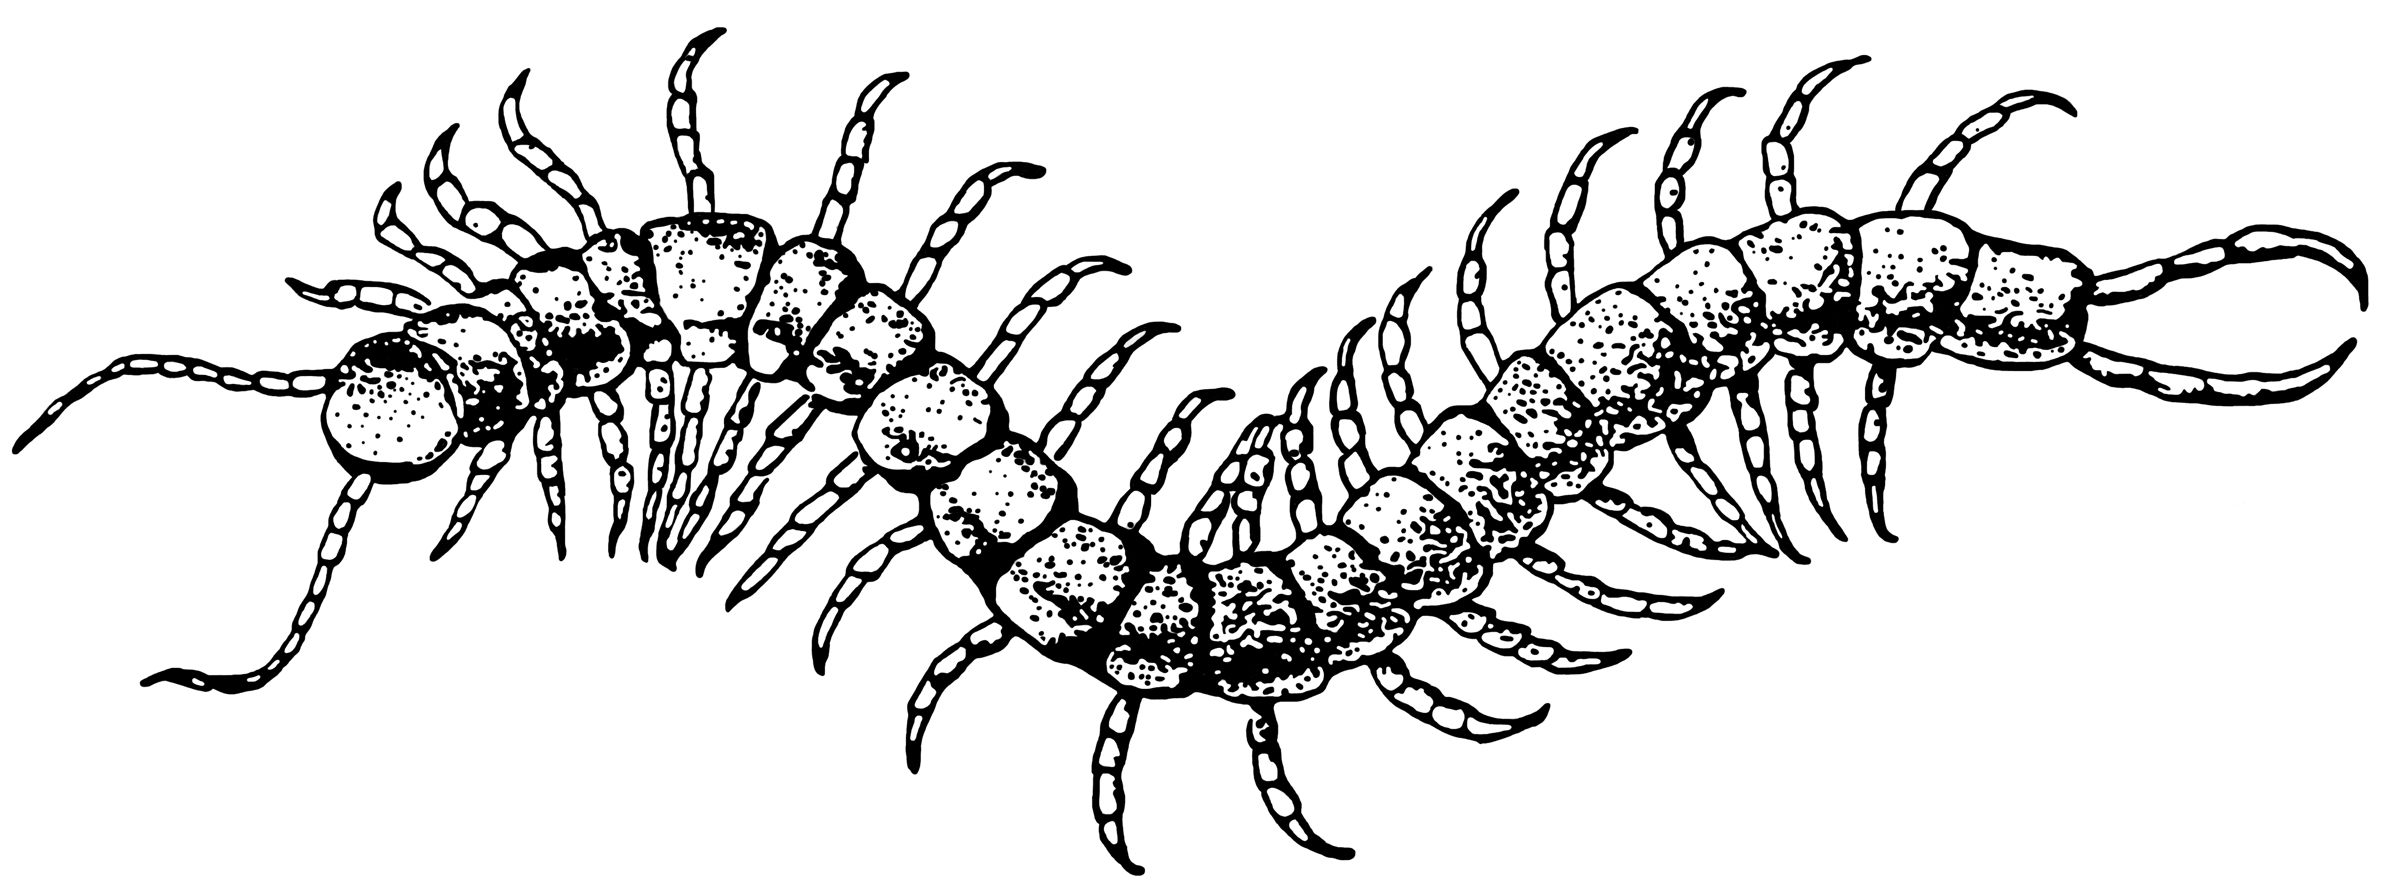 Centipede Drawing